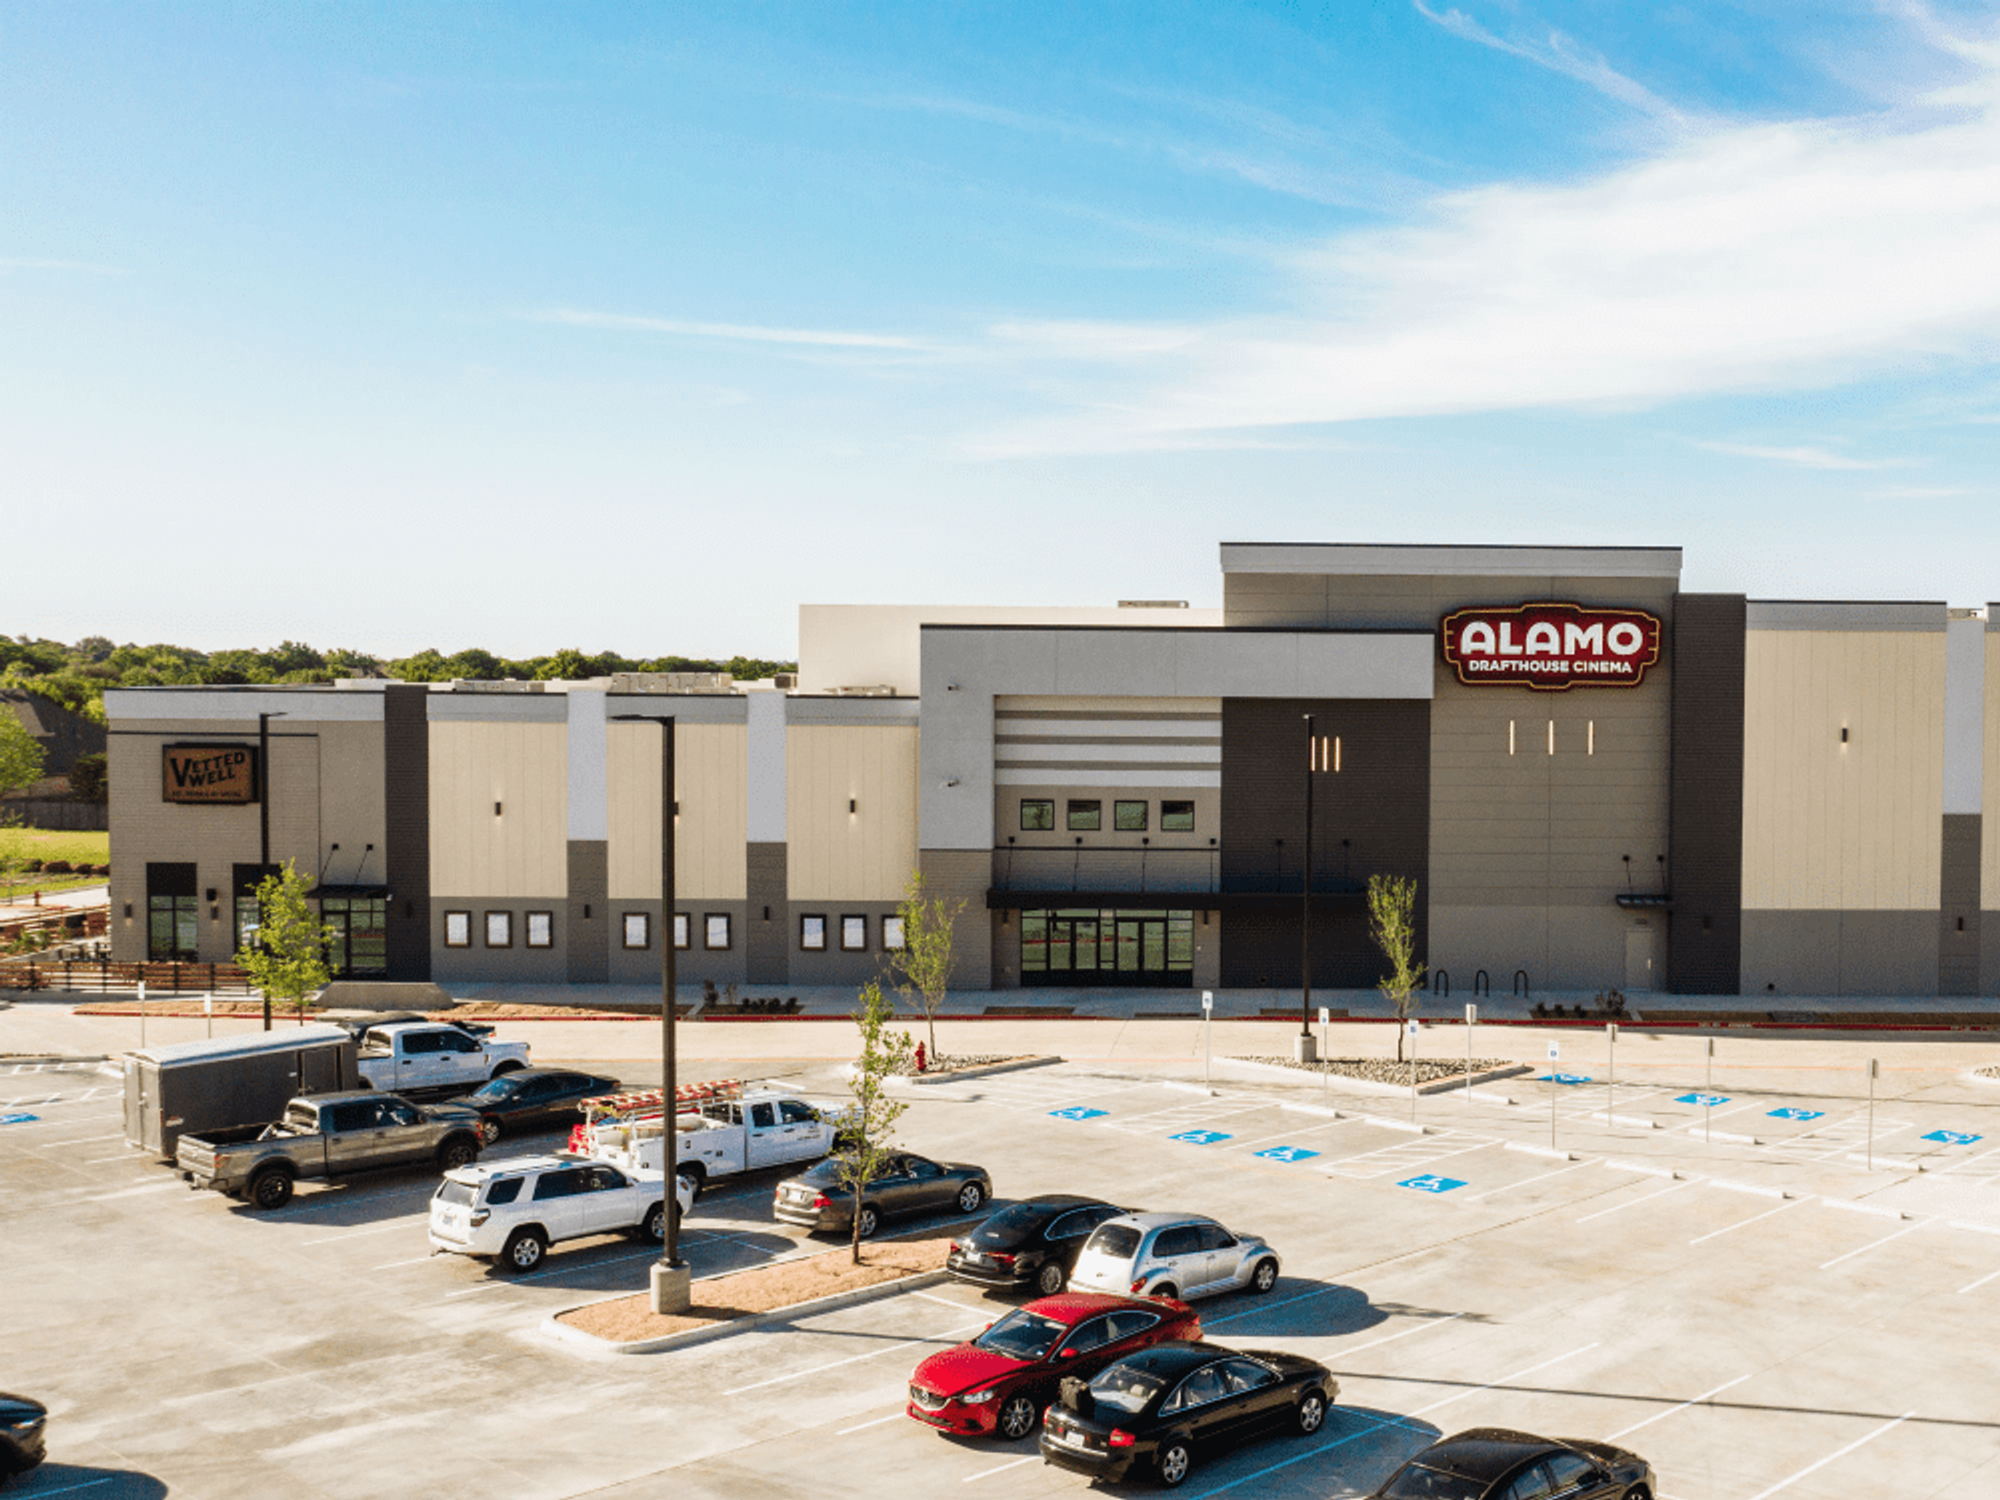 Alamo Drafthouse North Richland Hills will open to the public on April 25.